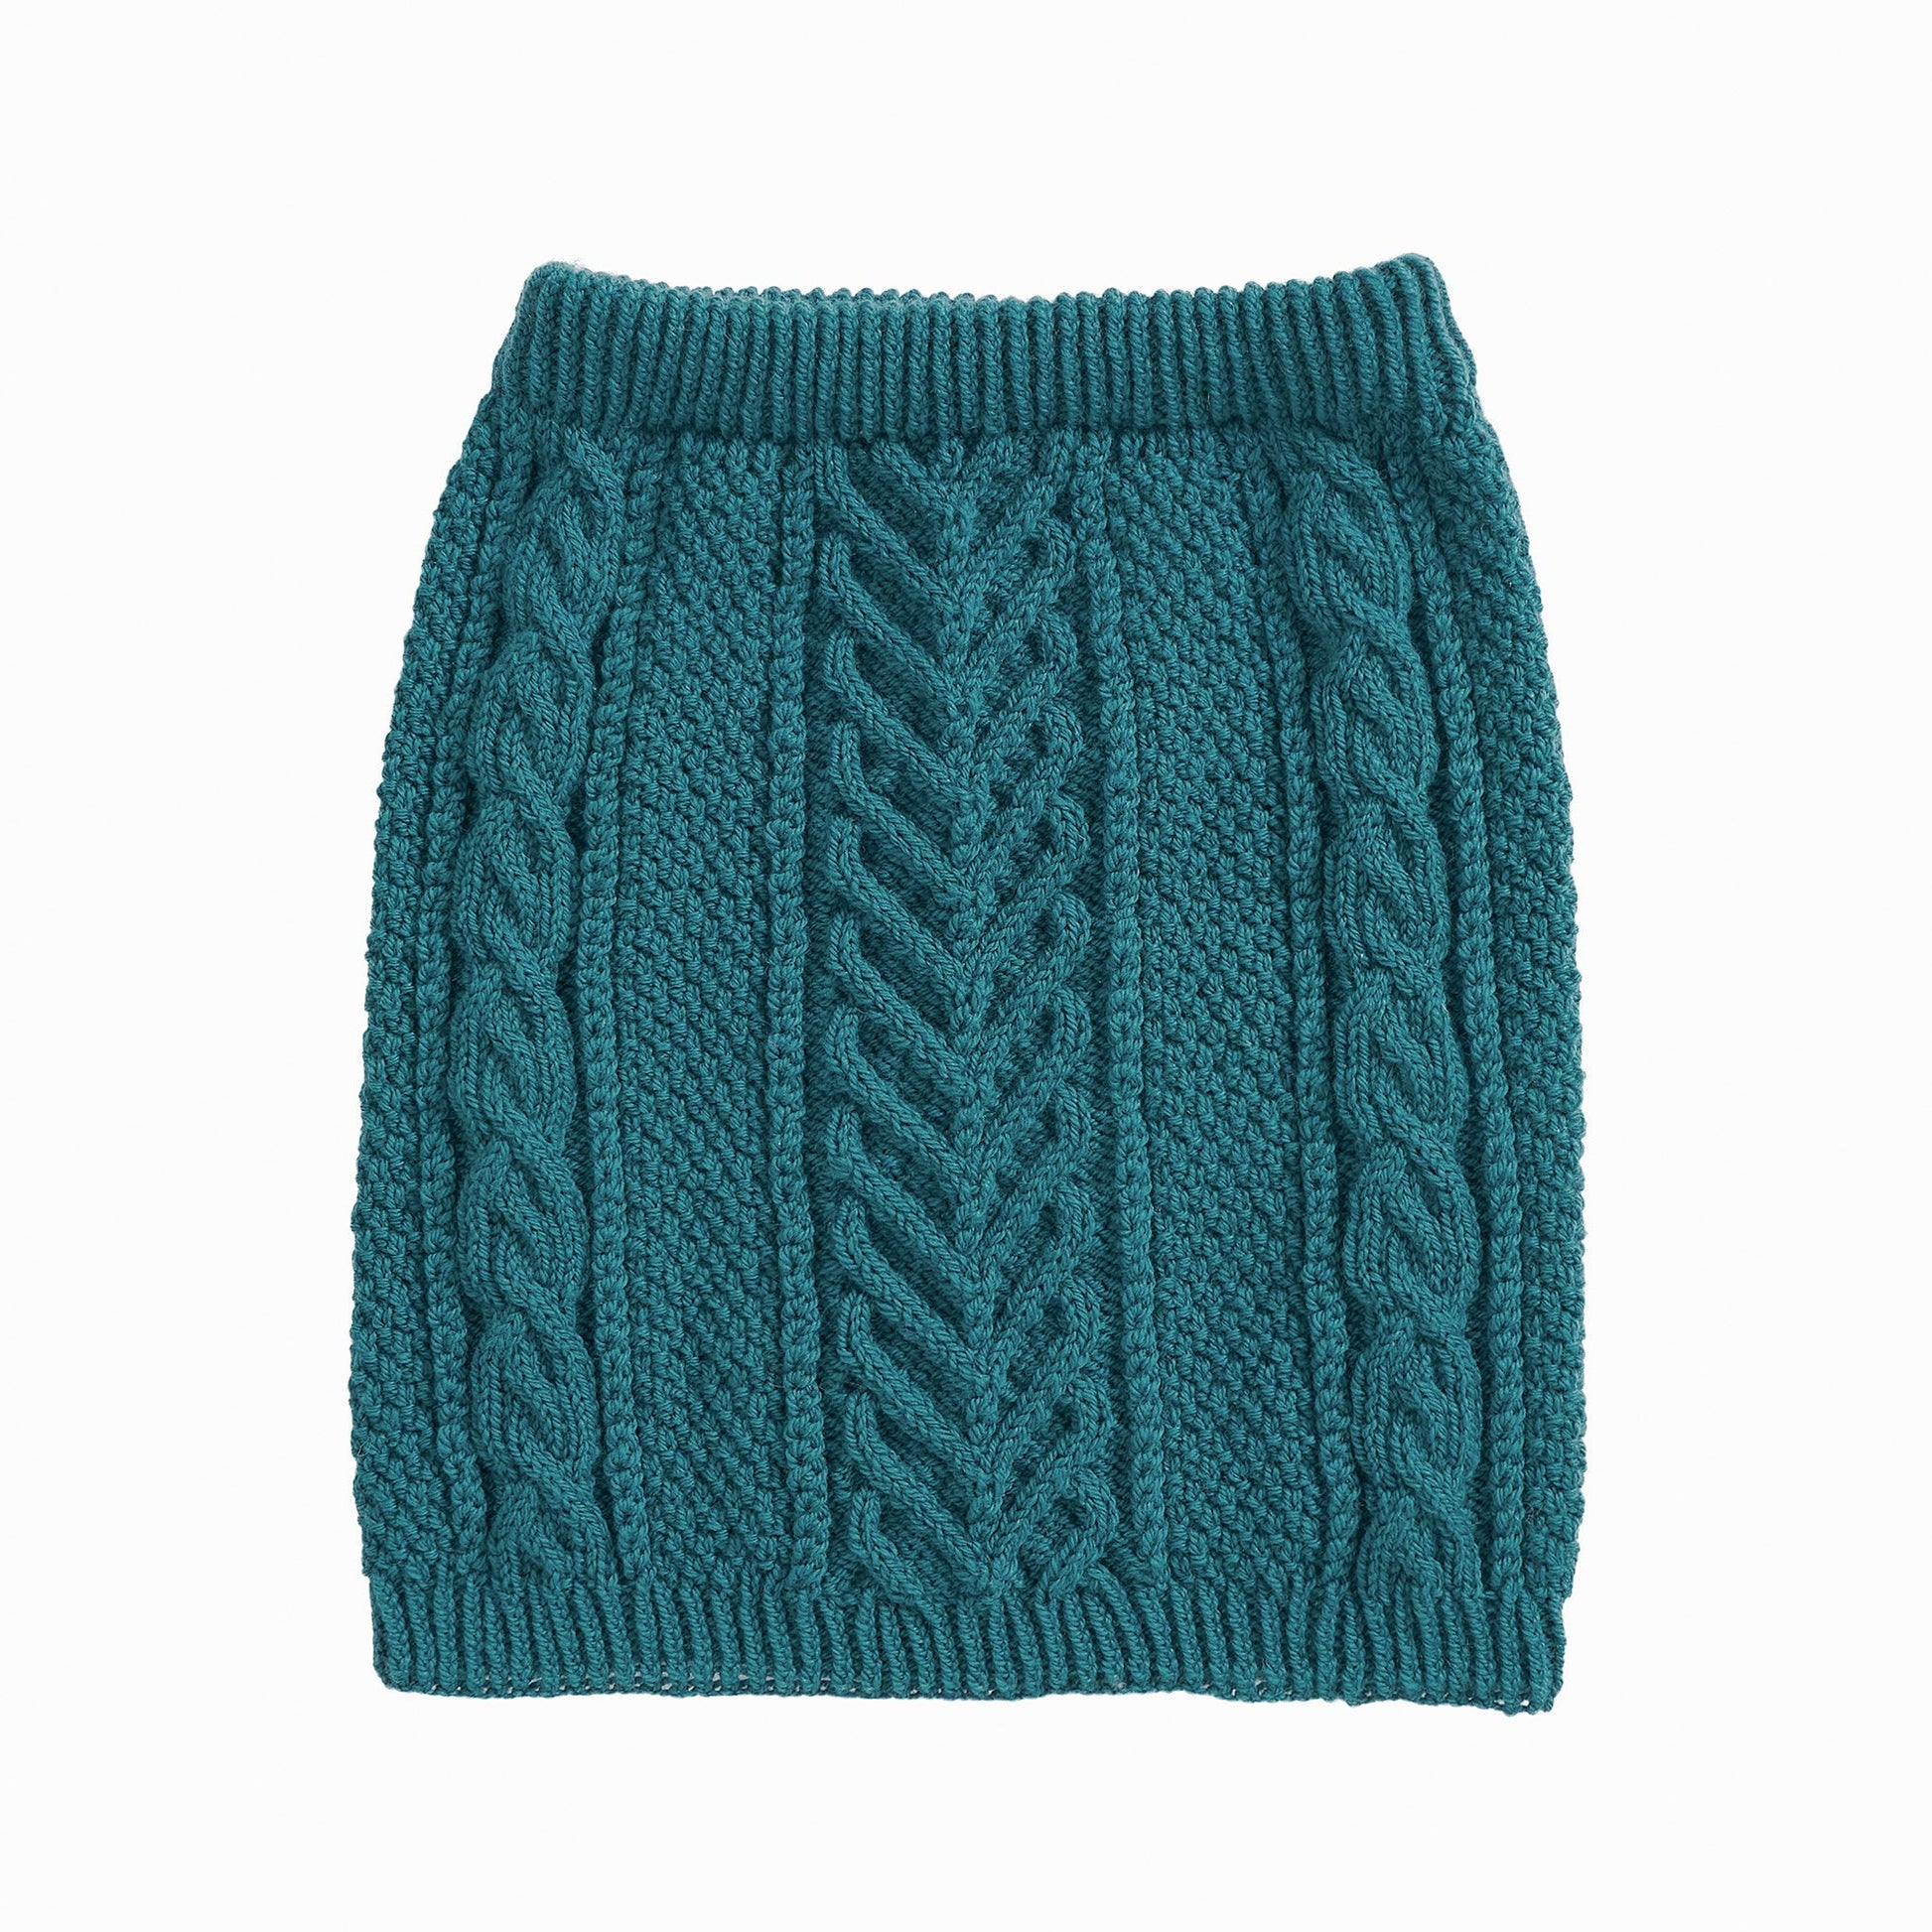 Free Patons Cable Knit Skirt Pattern